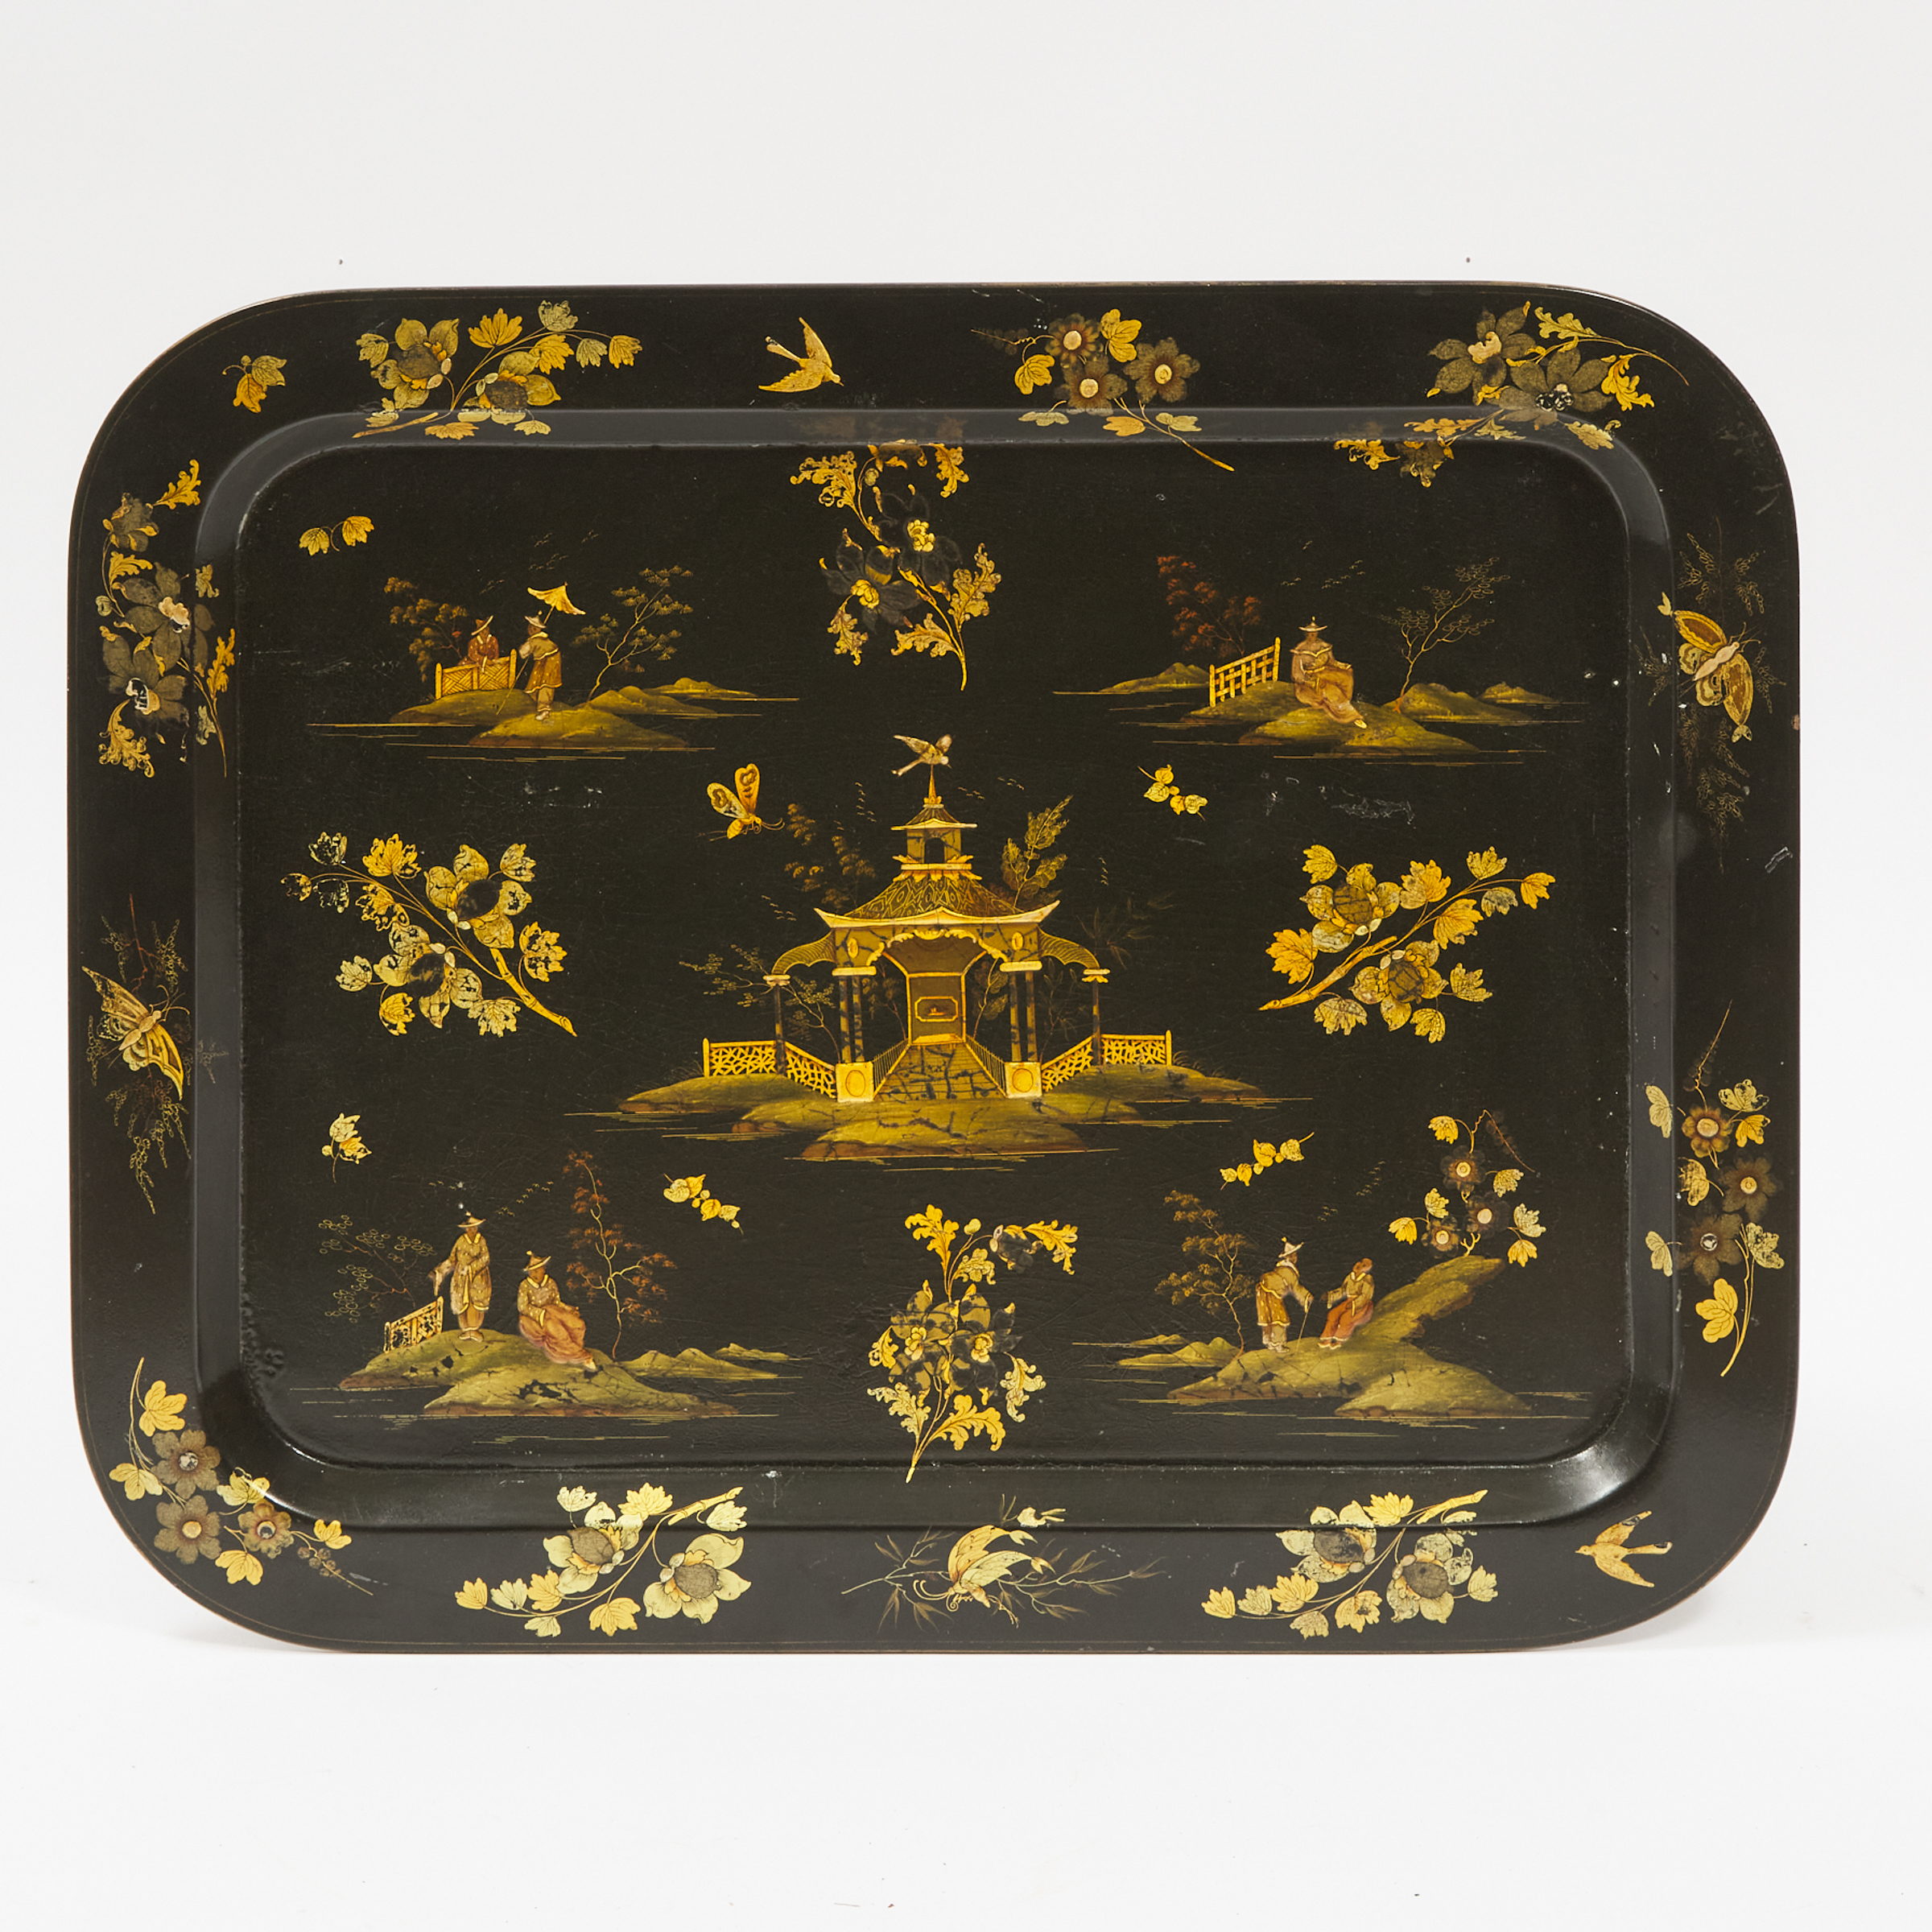 Regency Chinoiserie Decorated Black Lacquer Tea Tray, early 19th century